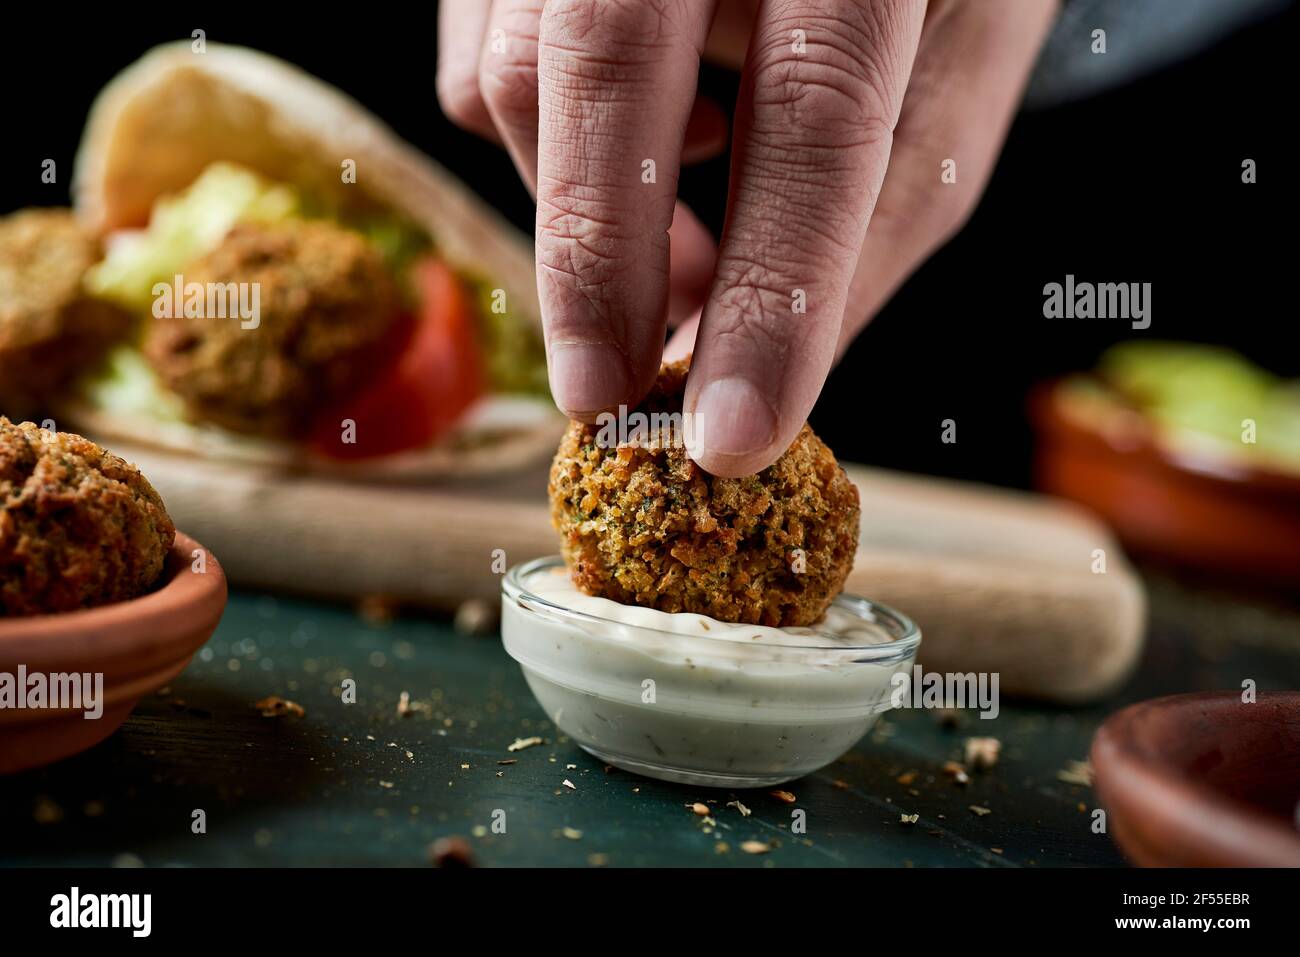 a young man dips a falafel in a bowl of yogurt sauce sitting at a rustic green wooden table Stock Photo